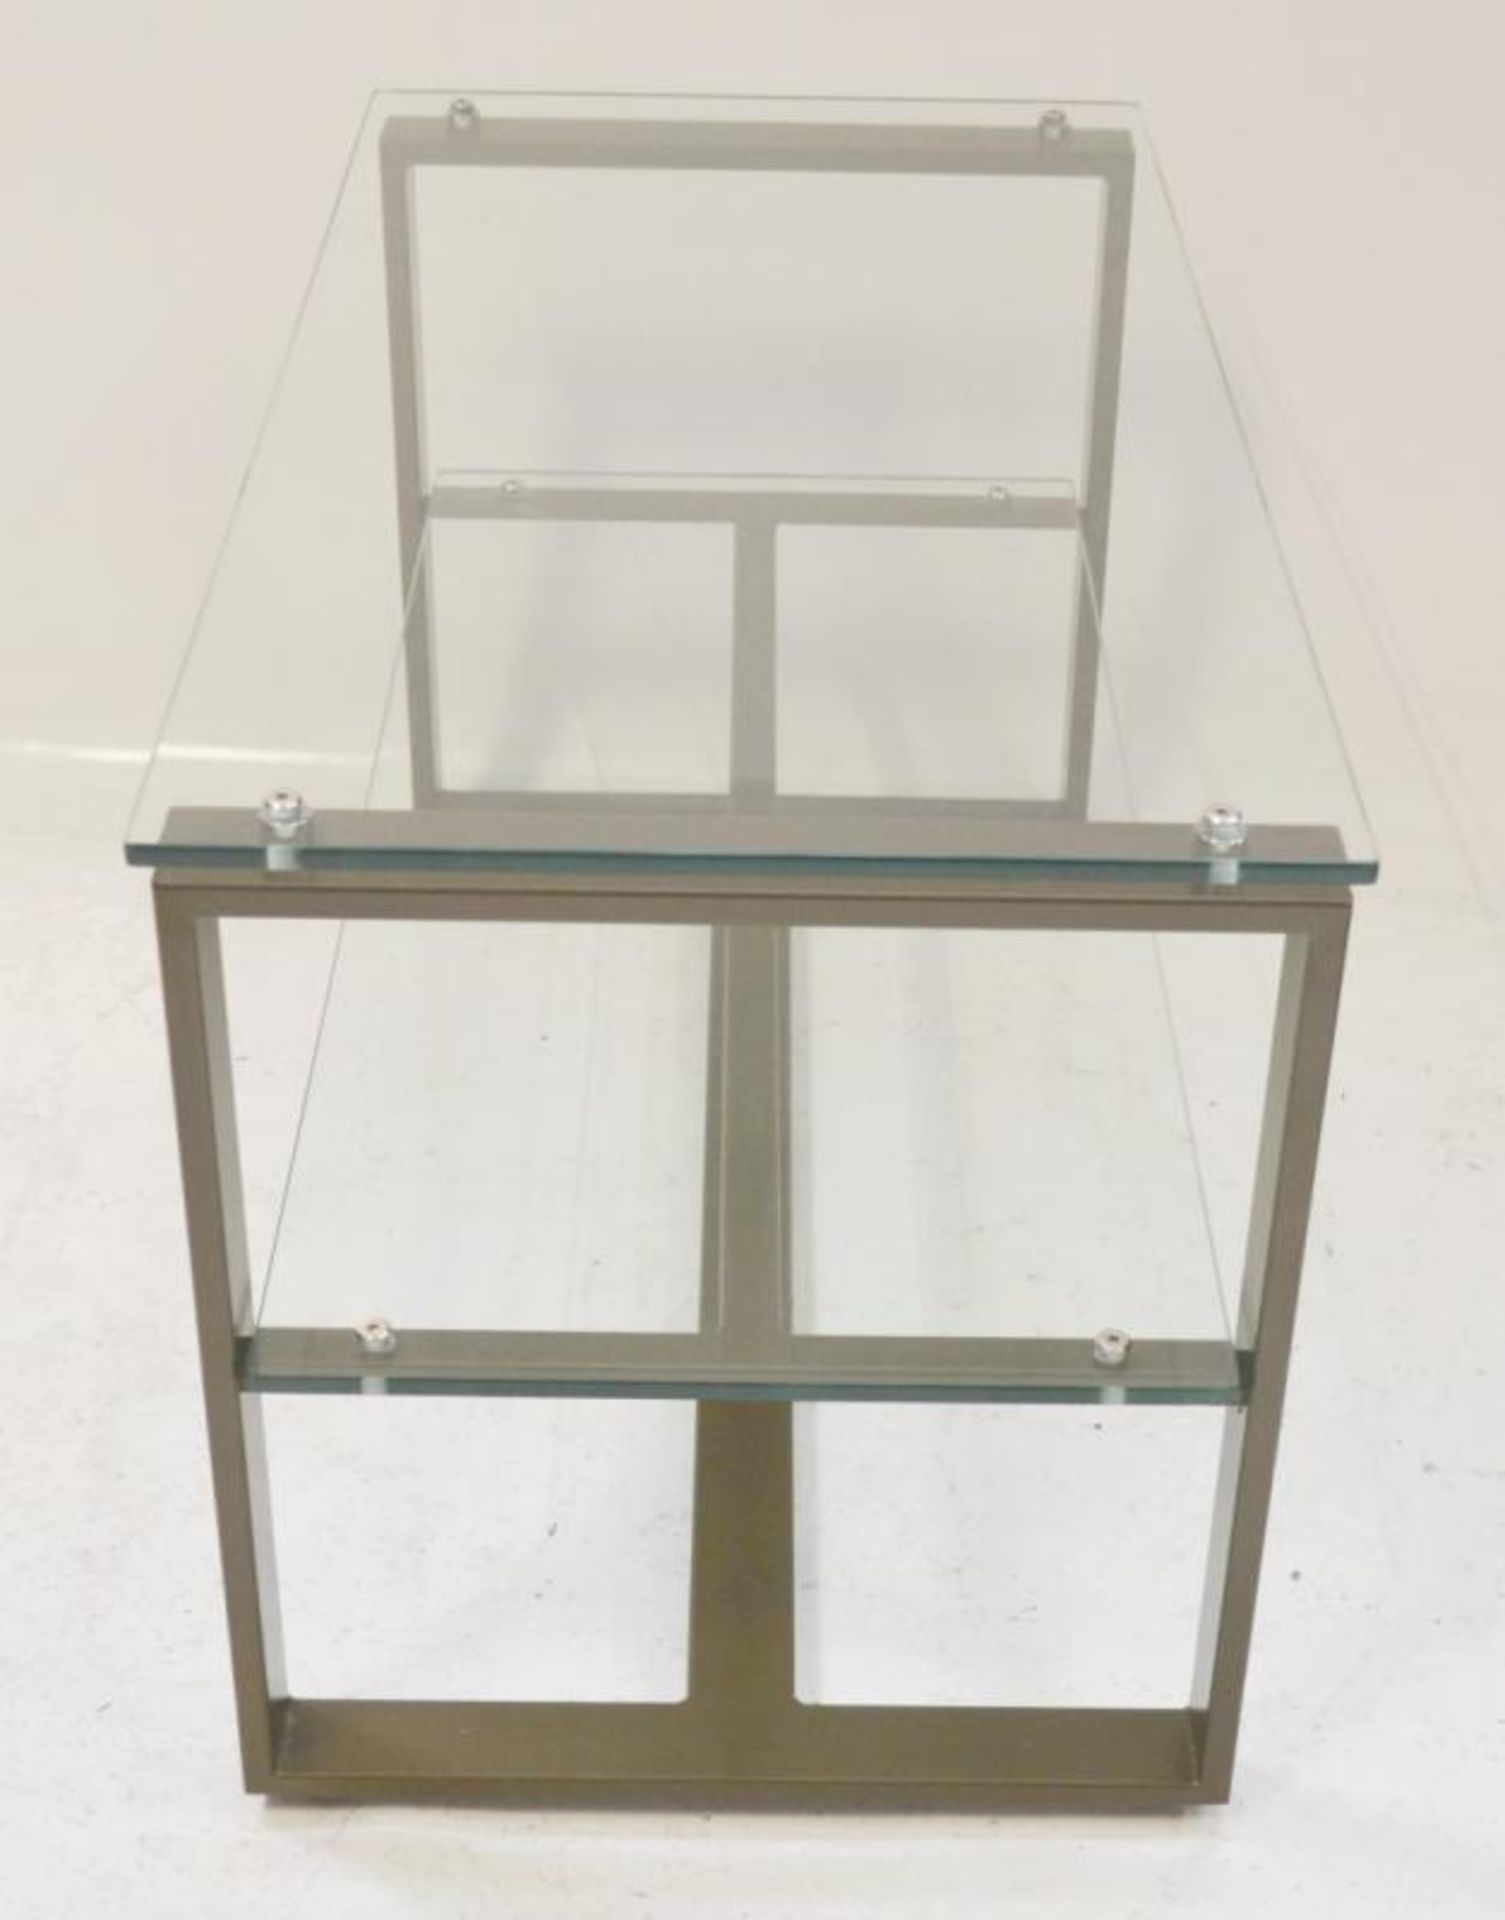 4 x 2-Shelf Glass Retail Display Units With Sturdy Metal Frames - Ex-Display, Recently Removed From - Image 3 of 4